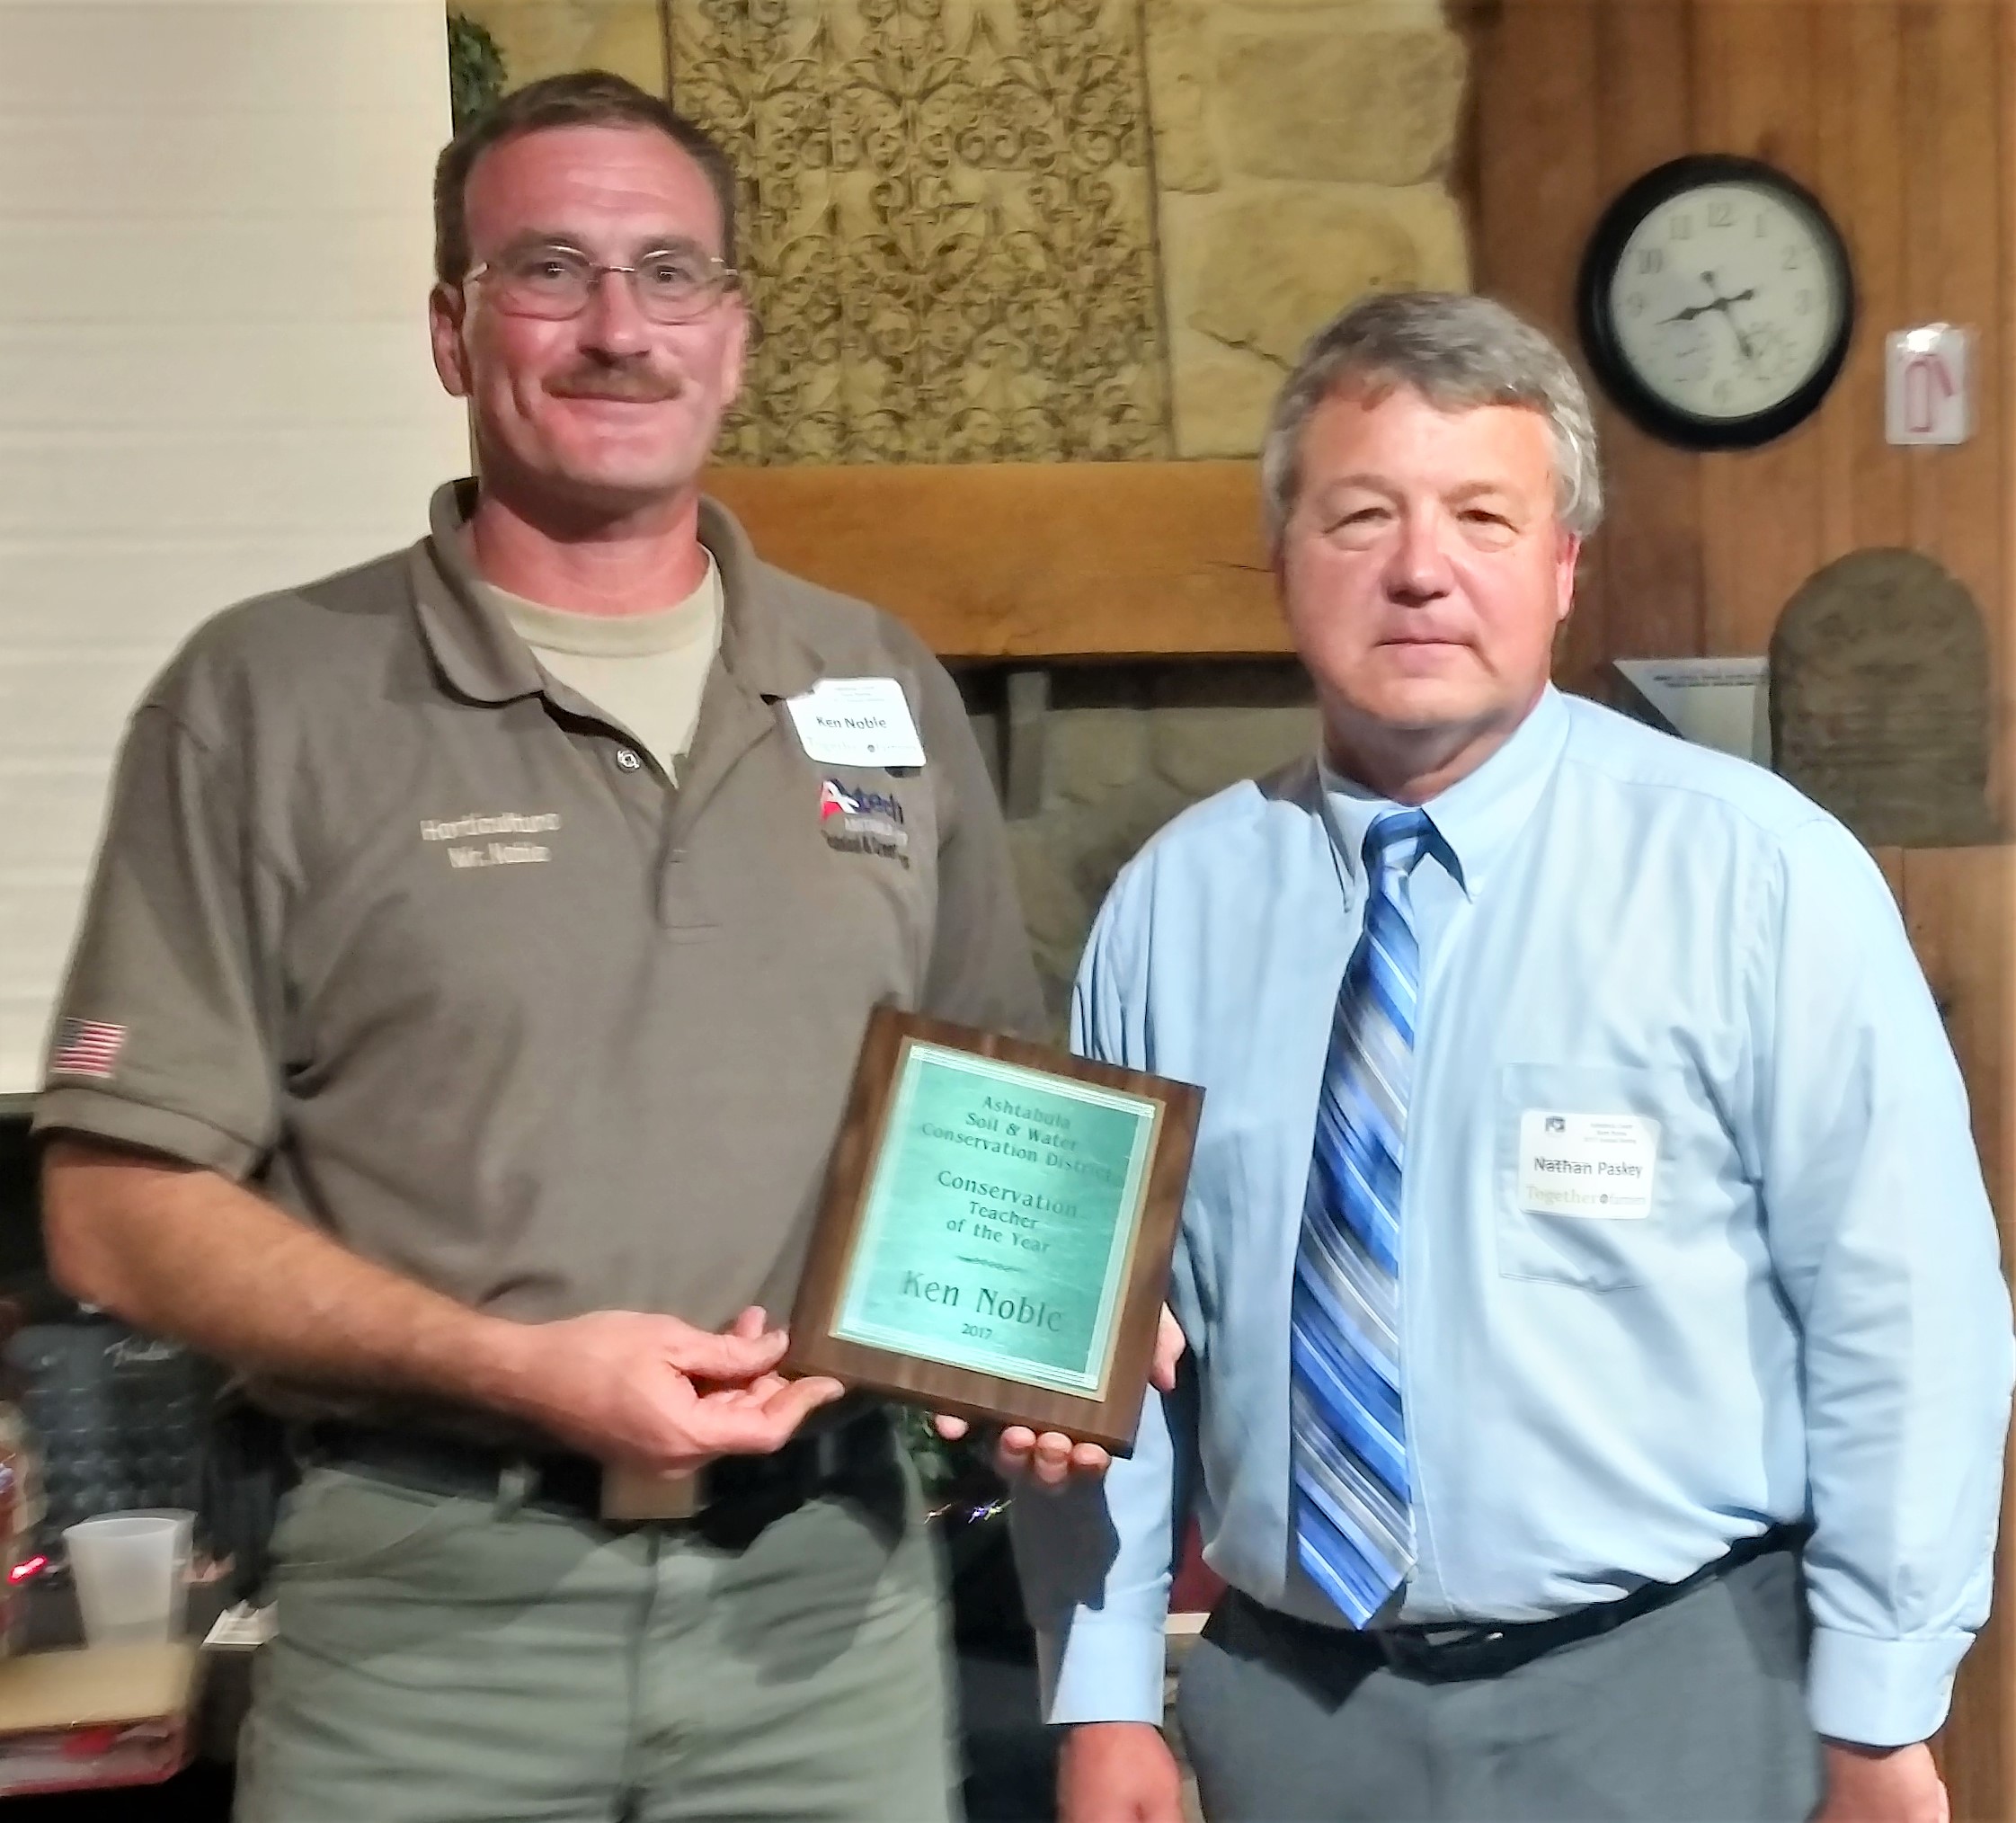 Ken Noble 2017 Conservation Teacher of the Year